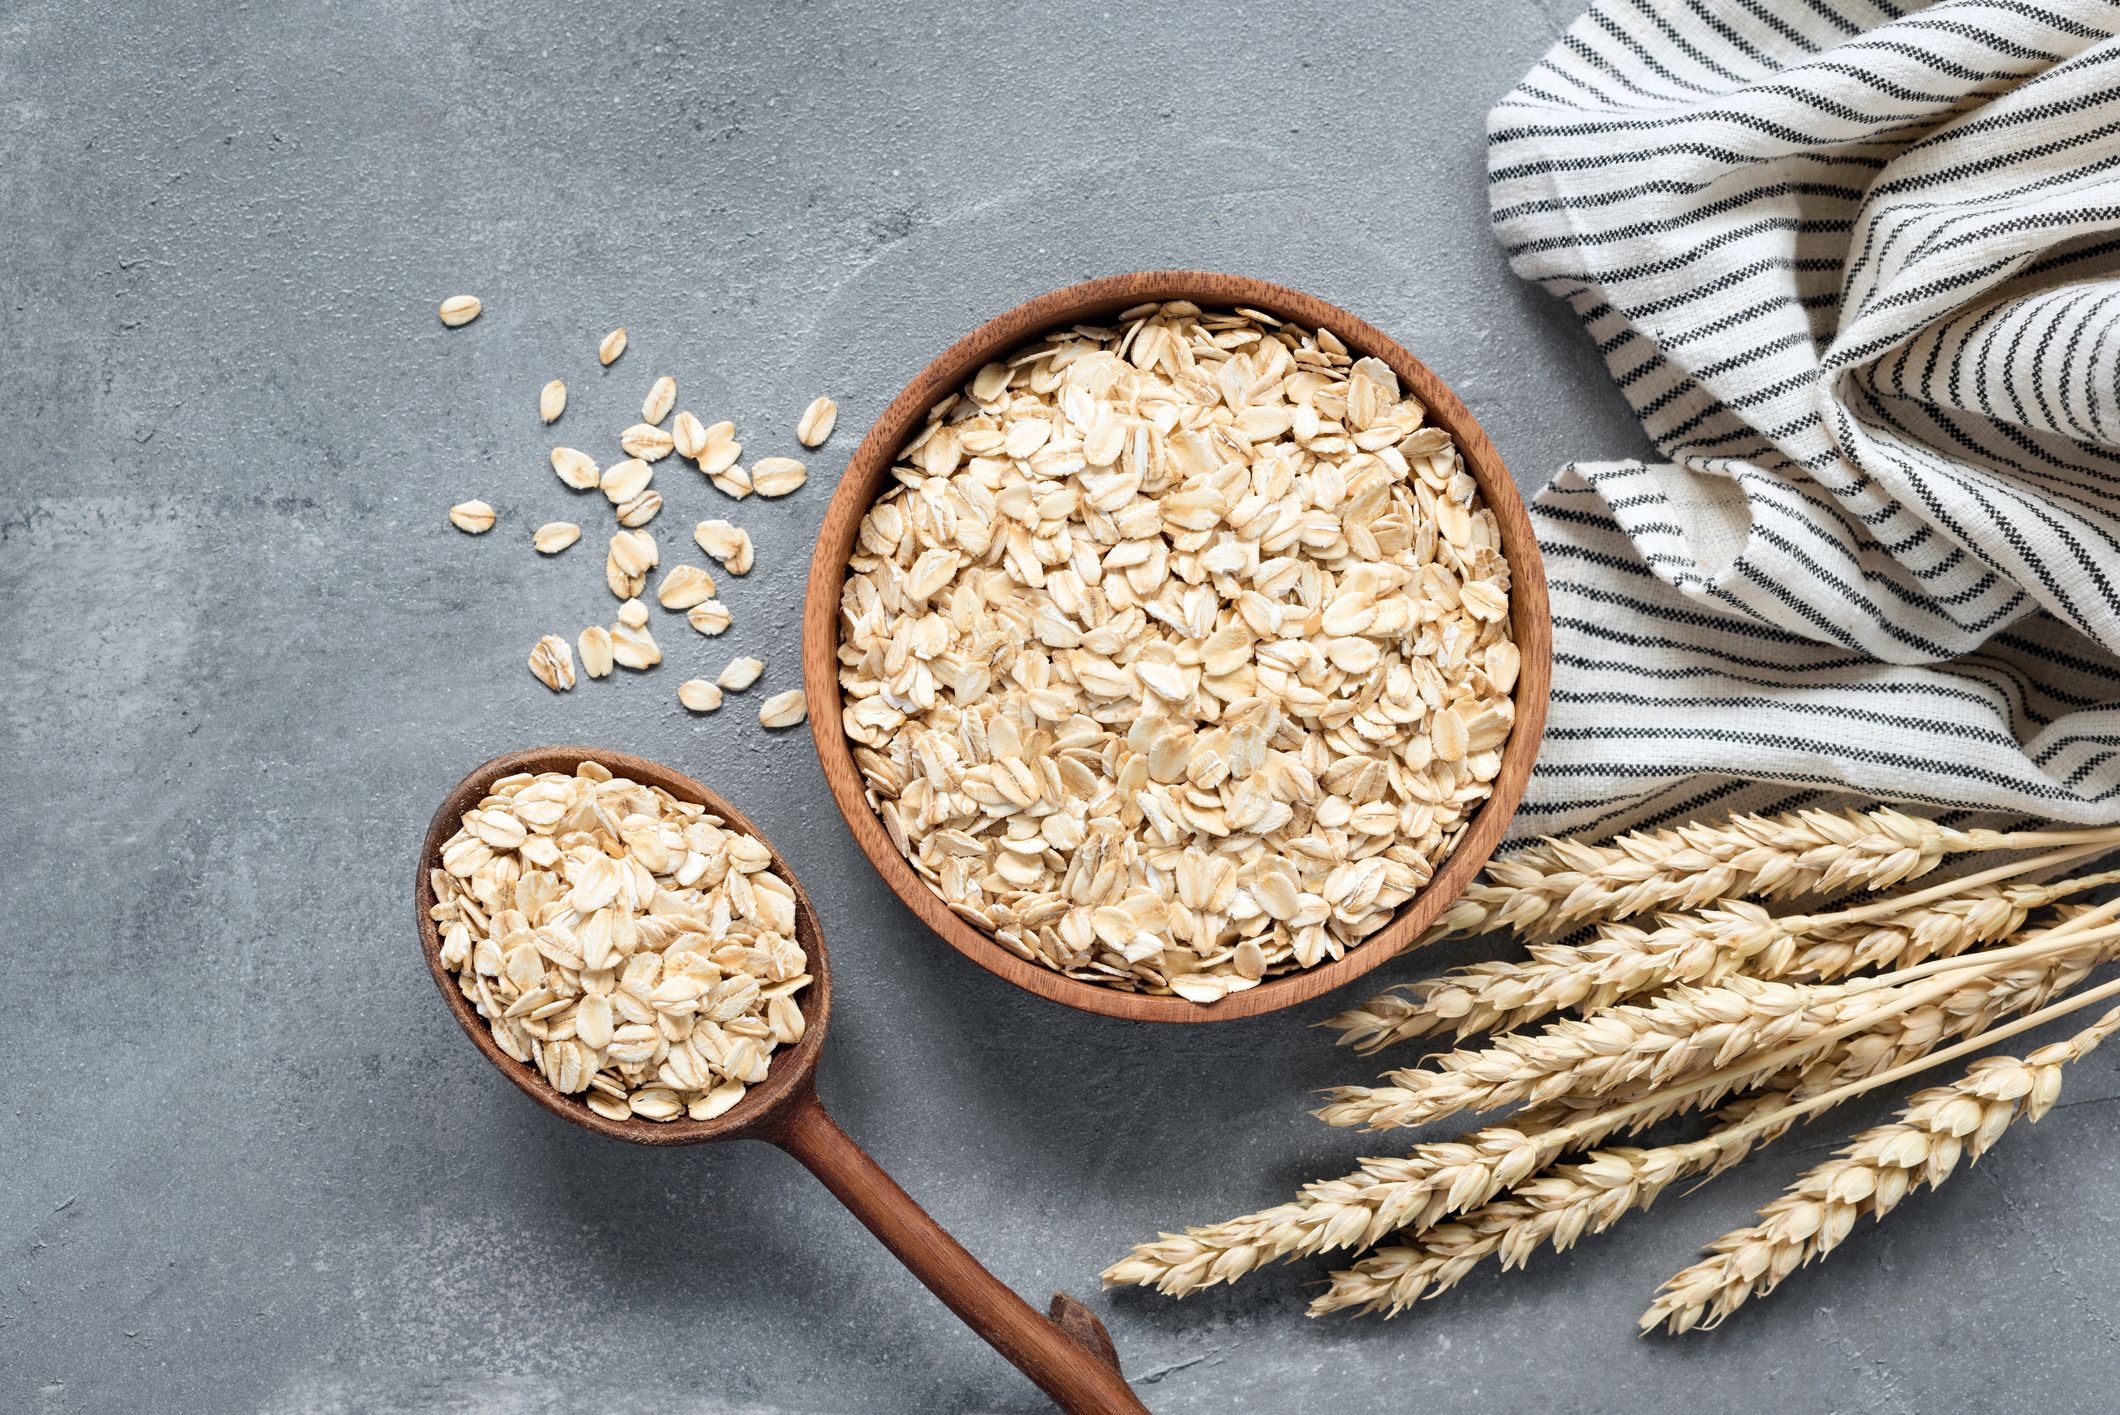 https://hips.hearstapps.com/hmg-prod/images/oats-rolled-oats-or-oat-flakes-in-wooden-bowl-royalty-free-image-1638819270.jpg